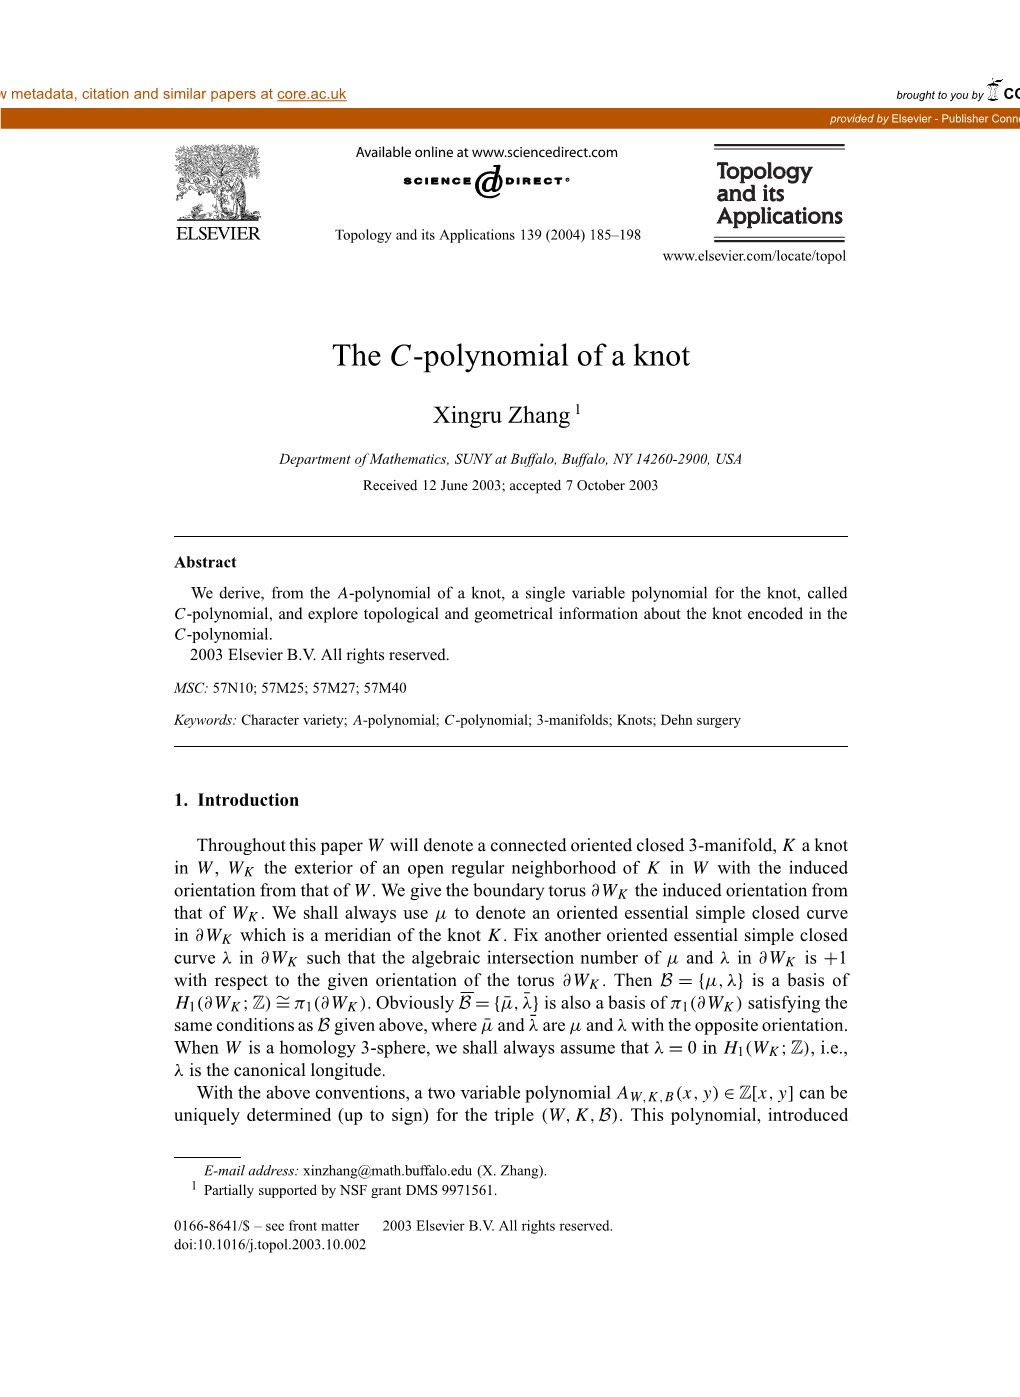 The C-Polynomial of a Knot